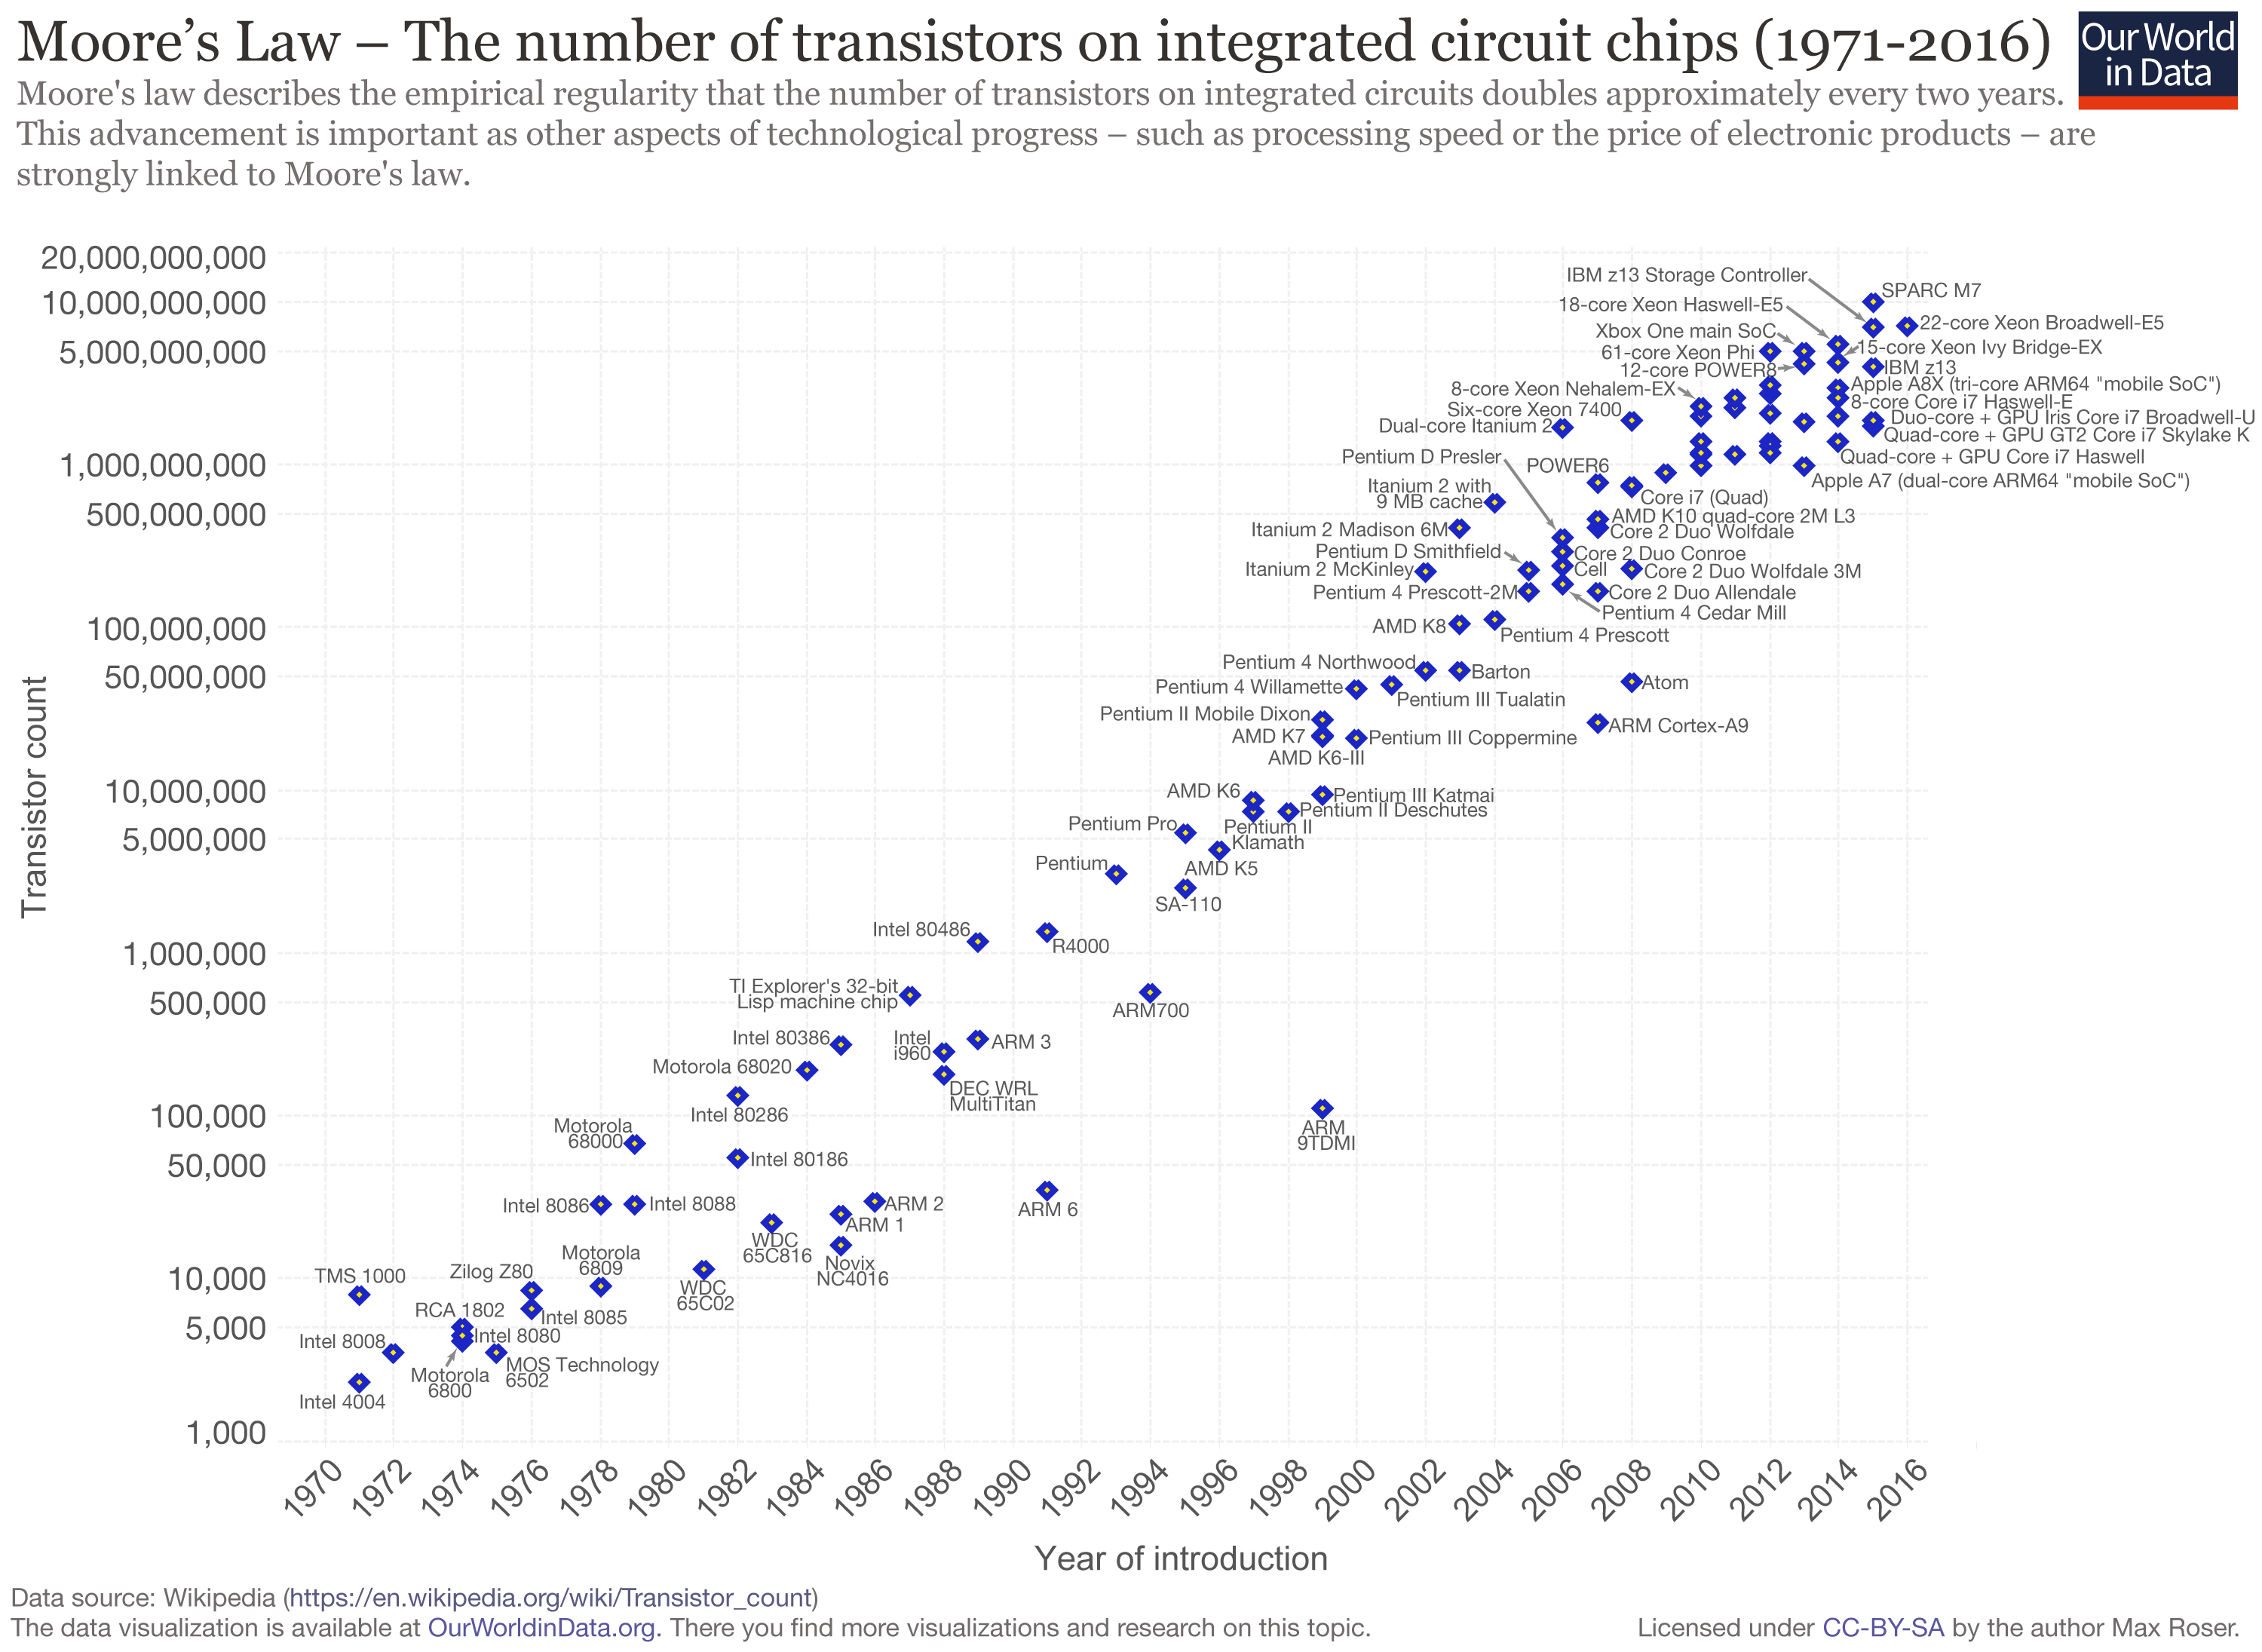 The number of transistors throughout the years. We can observe a recent start of a decline